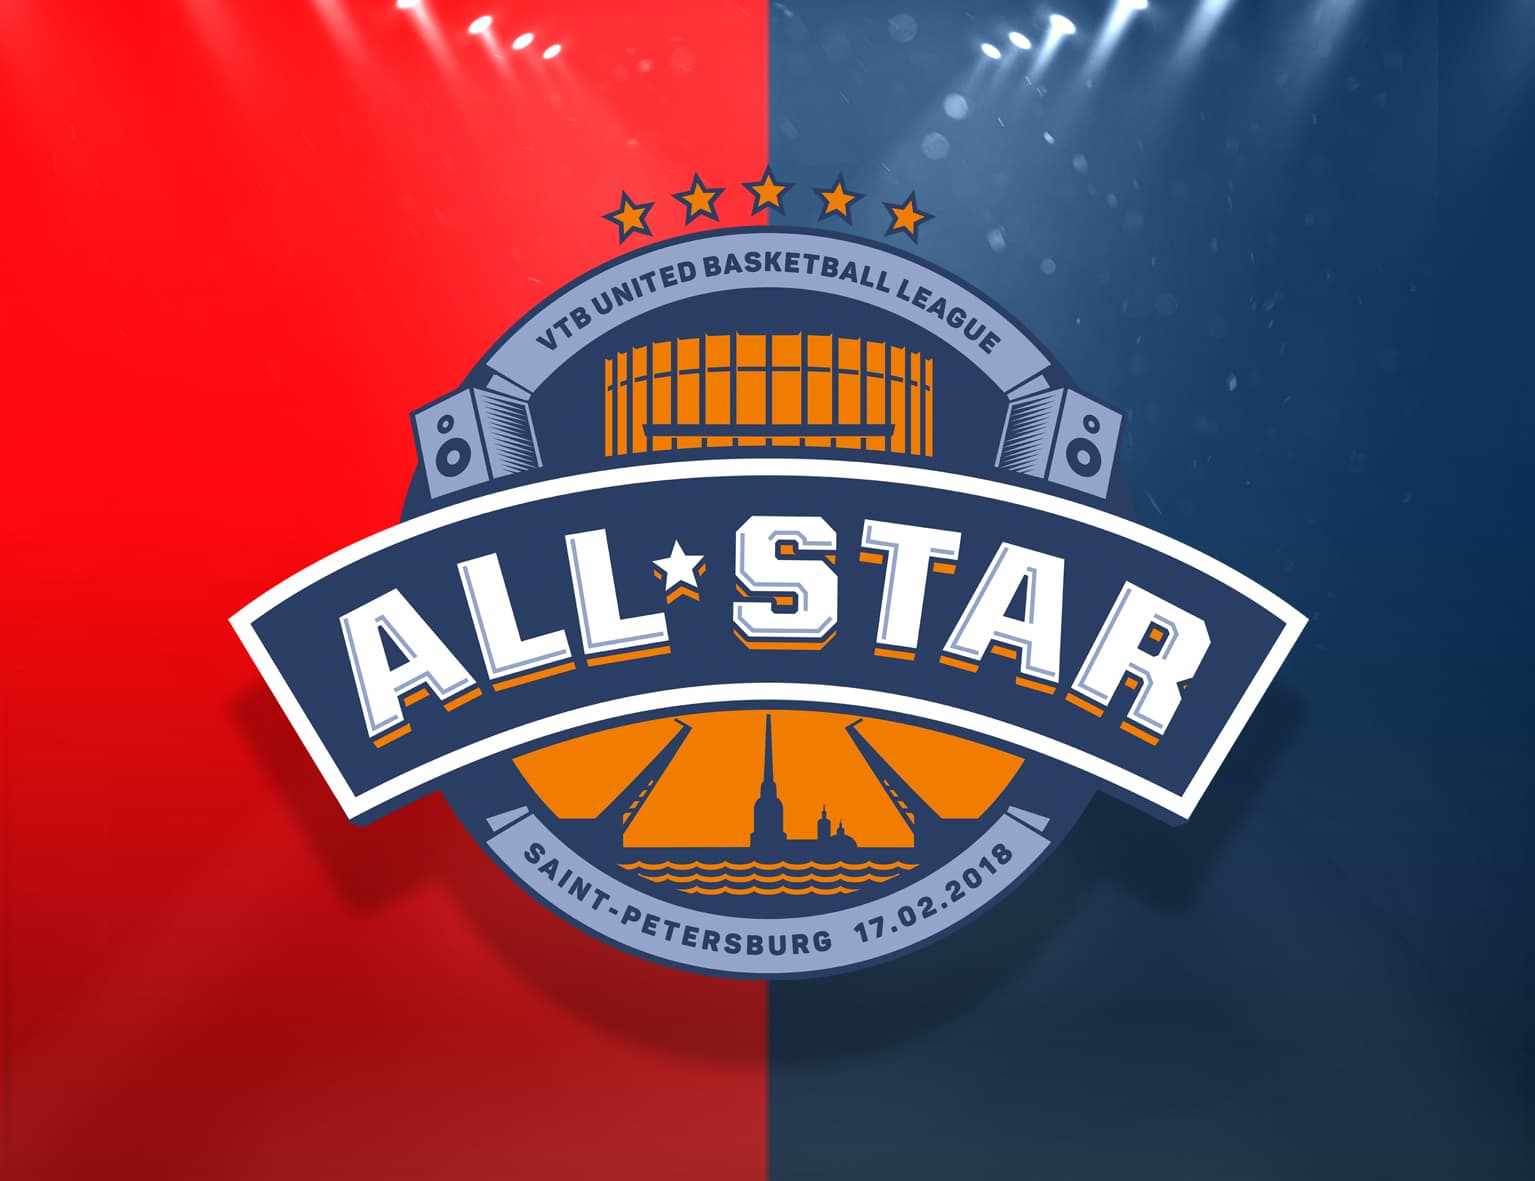 All-Star Game Tickets Go On Sale December 7!